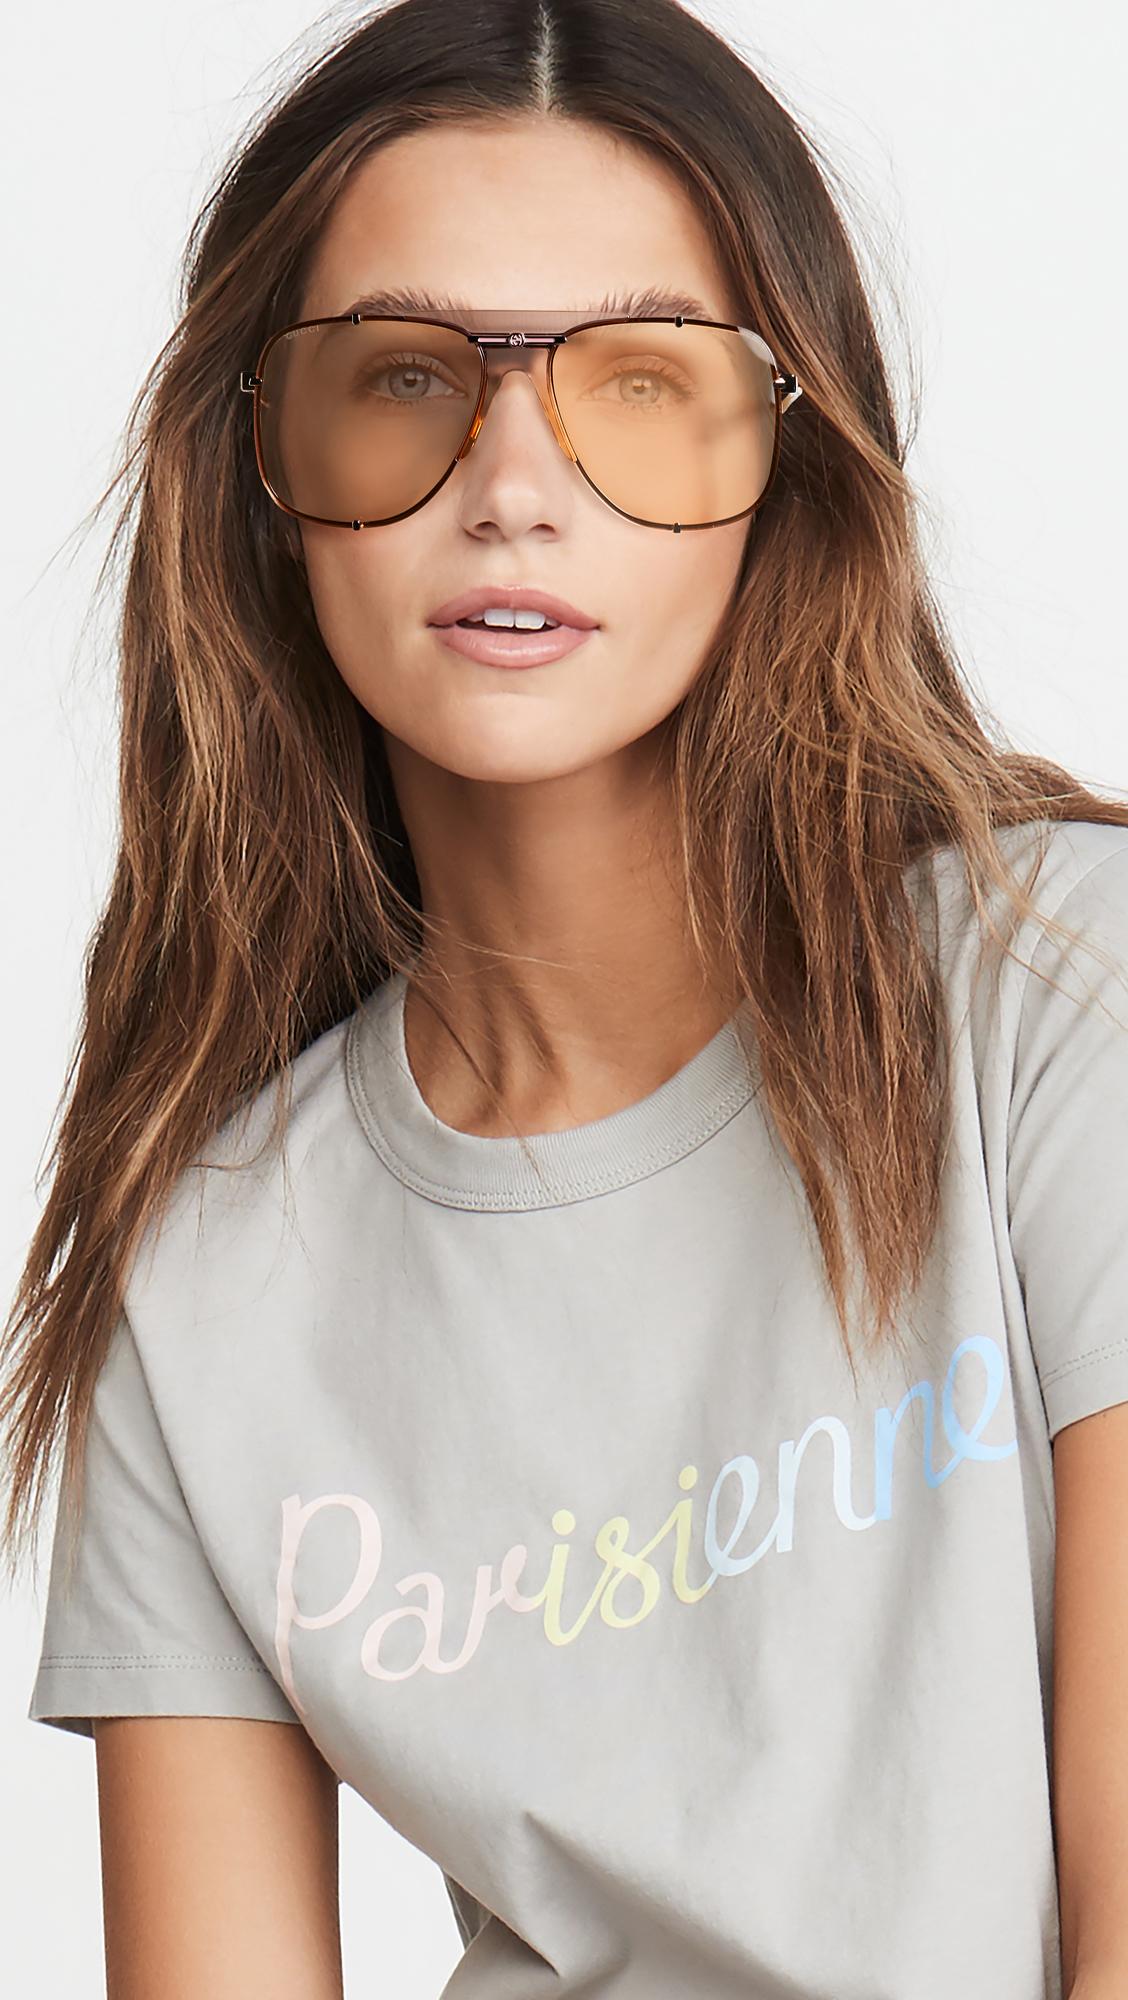 Chain Embellished Aviator Sunglasses in Pink - Gucci